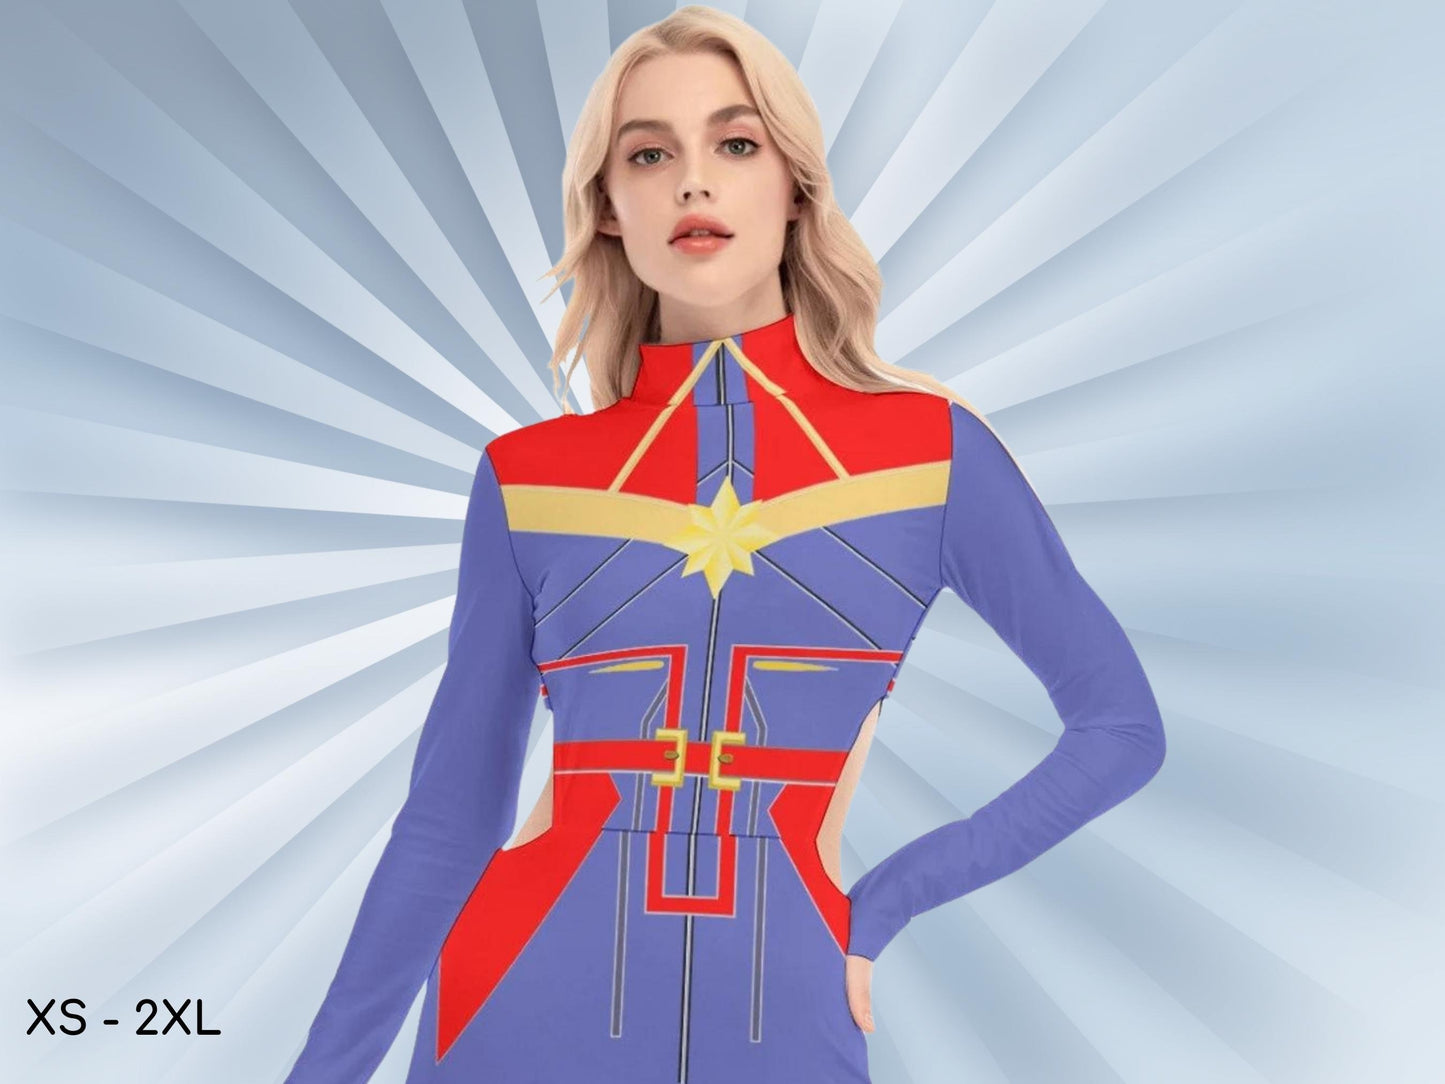 Captain Hollow Waist Sexy Dress,, Comics Captain, Cosplay Dress, Adult Halloween Costume Birthday, Gift for Her,  Marvel Woman, Sexy Dress